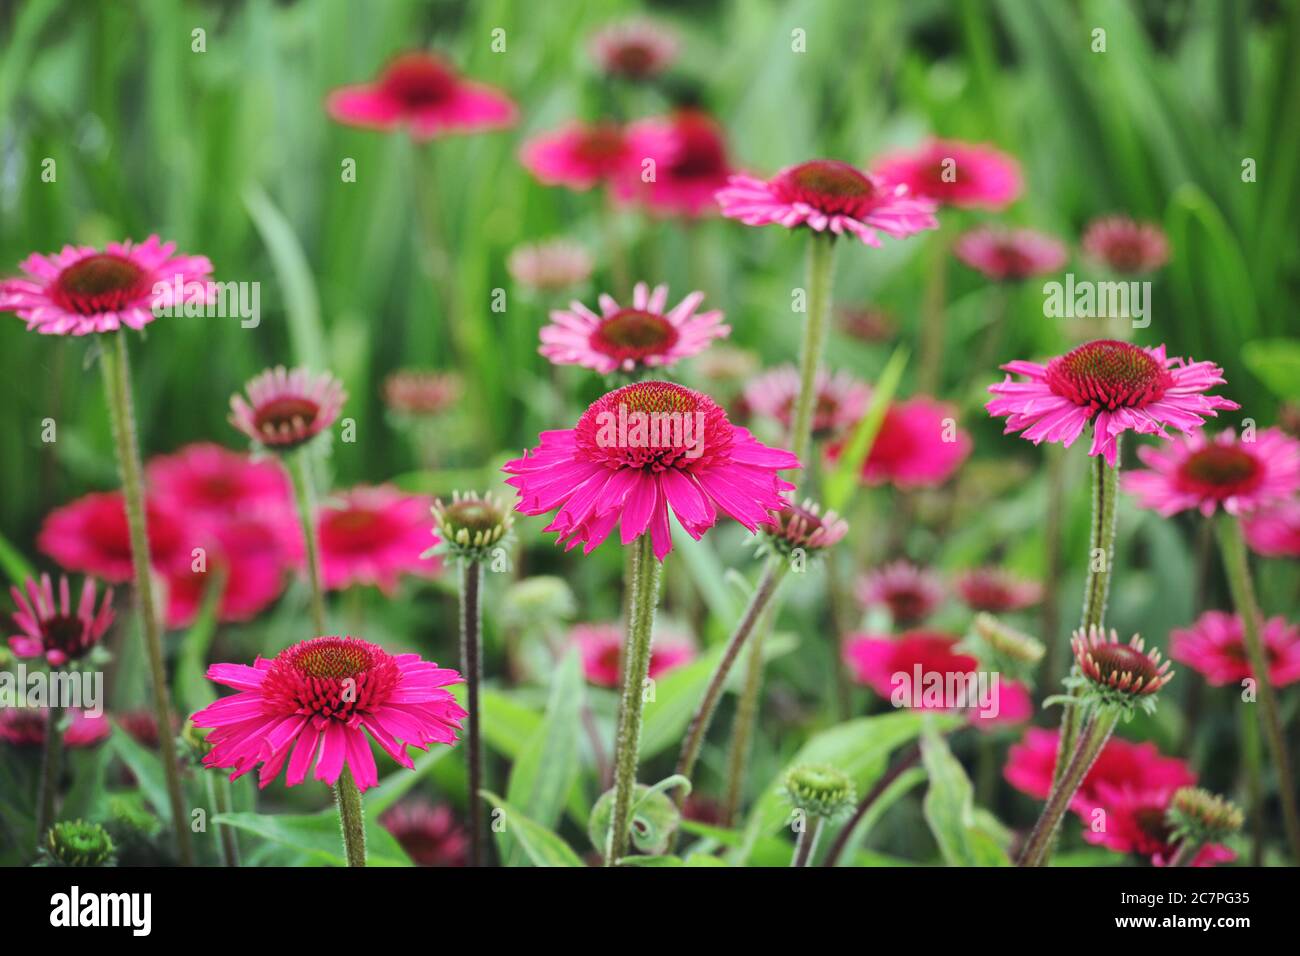 Pink Echinacea 'Delicious Candy' corn flower in flower during the summer months Stock Photo